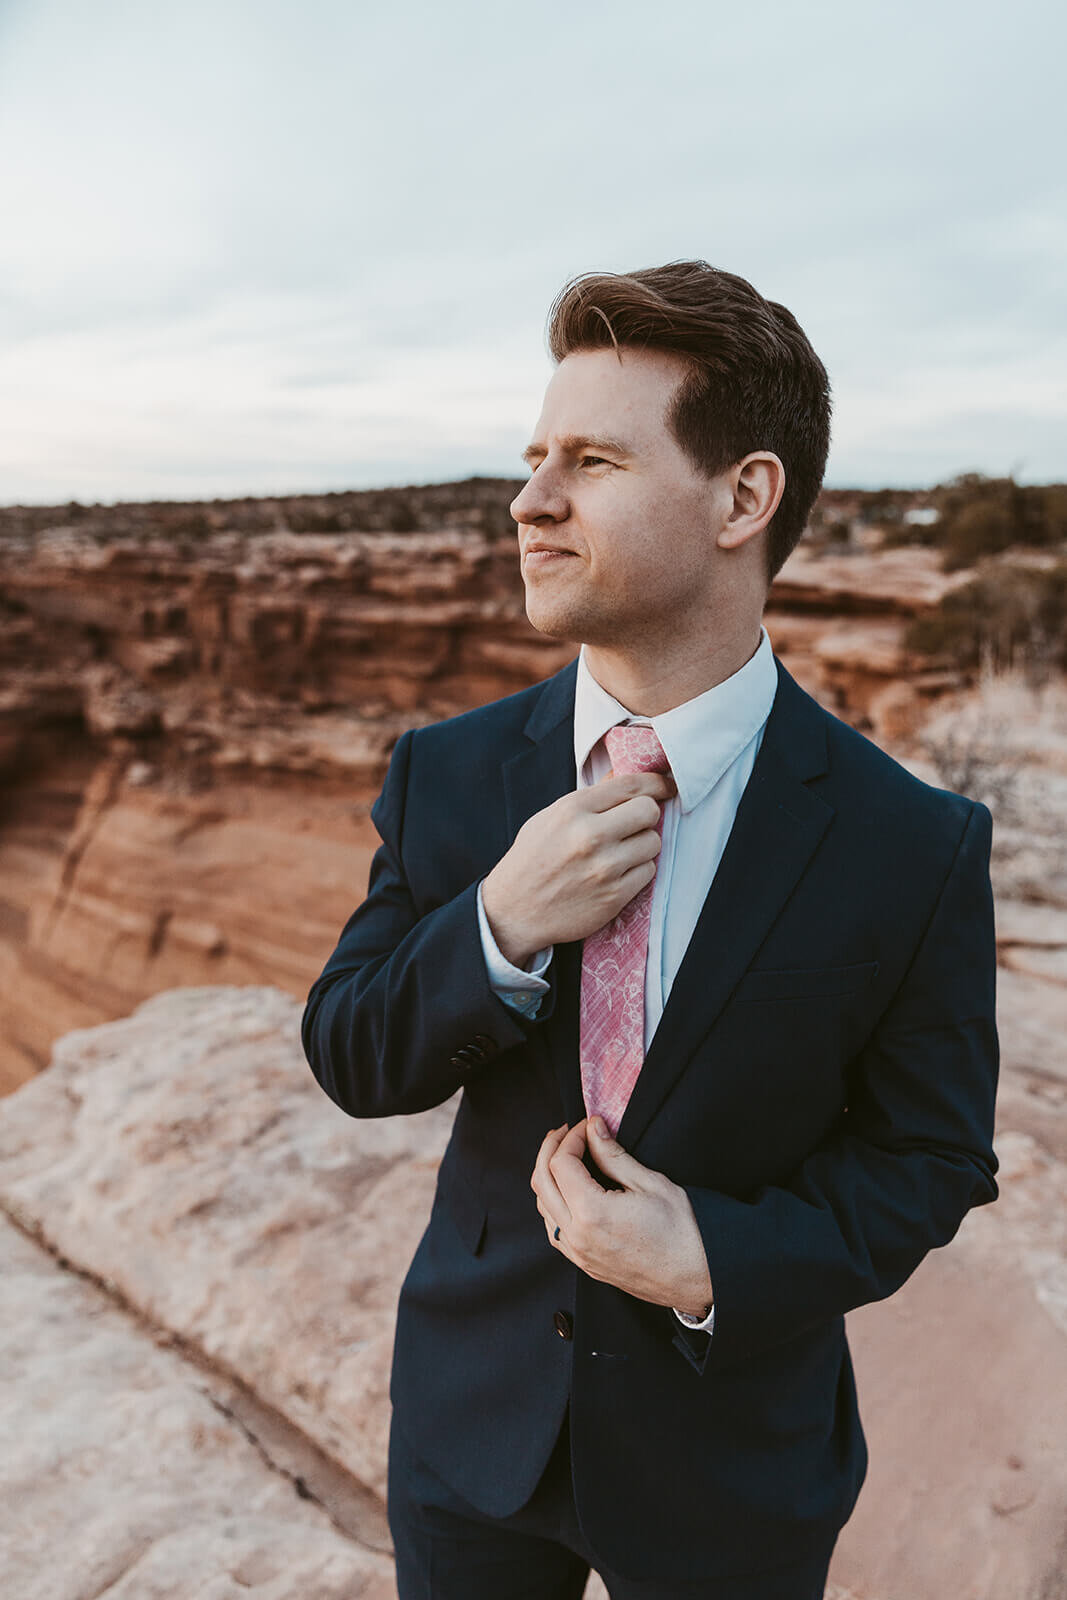  Groom straightens tie with standing on cliff edge during anniversary celebration at sunset at Dead Horse Point State Park and the La Sal Mountains near Moab, Utah with incredible views and hiking. Utah wedding photographer 